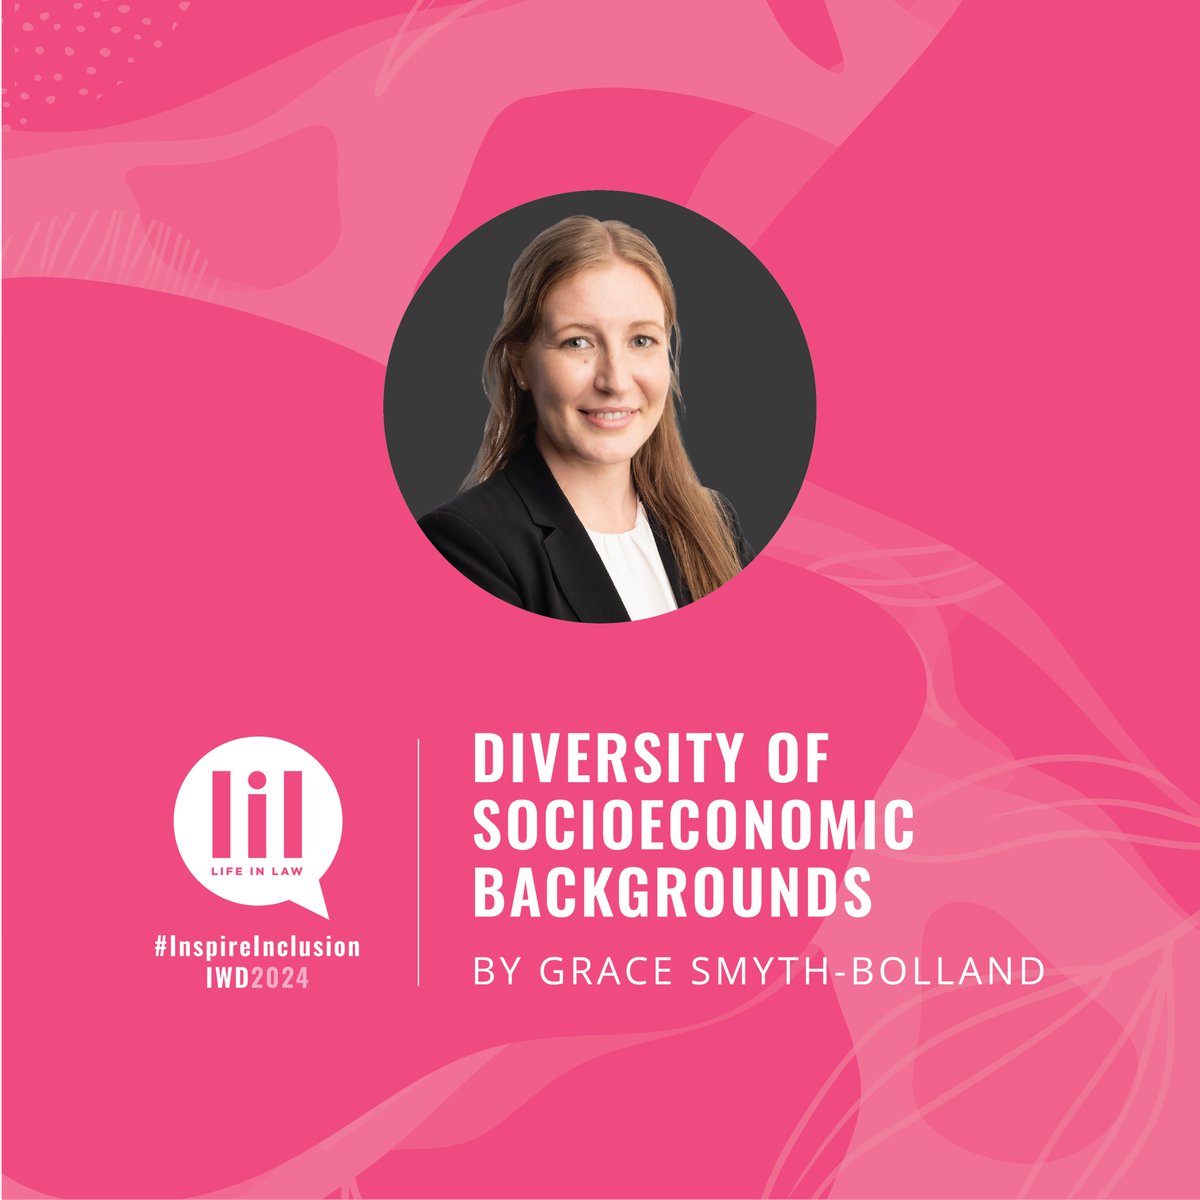 Happy International Women’s Day! Continuing with Blog Week in honour of International Women's Day, our second post is by LiL Leader, frequent voice on the blog and @harpergreyllp lawyer, Grace Smyth-Bolland lifeinlaw.ca/blog/diversity… #lifeinlaw #IWD2024 #inspireinclusion